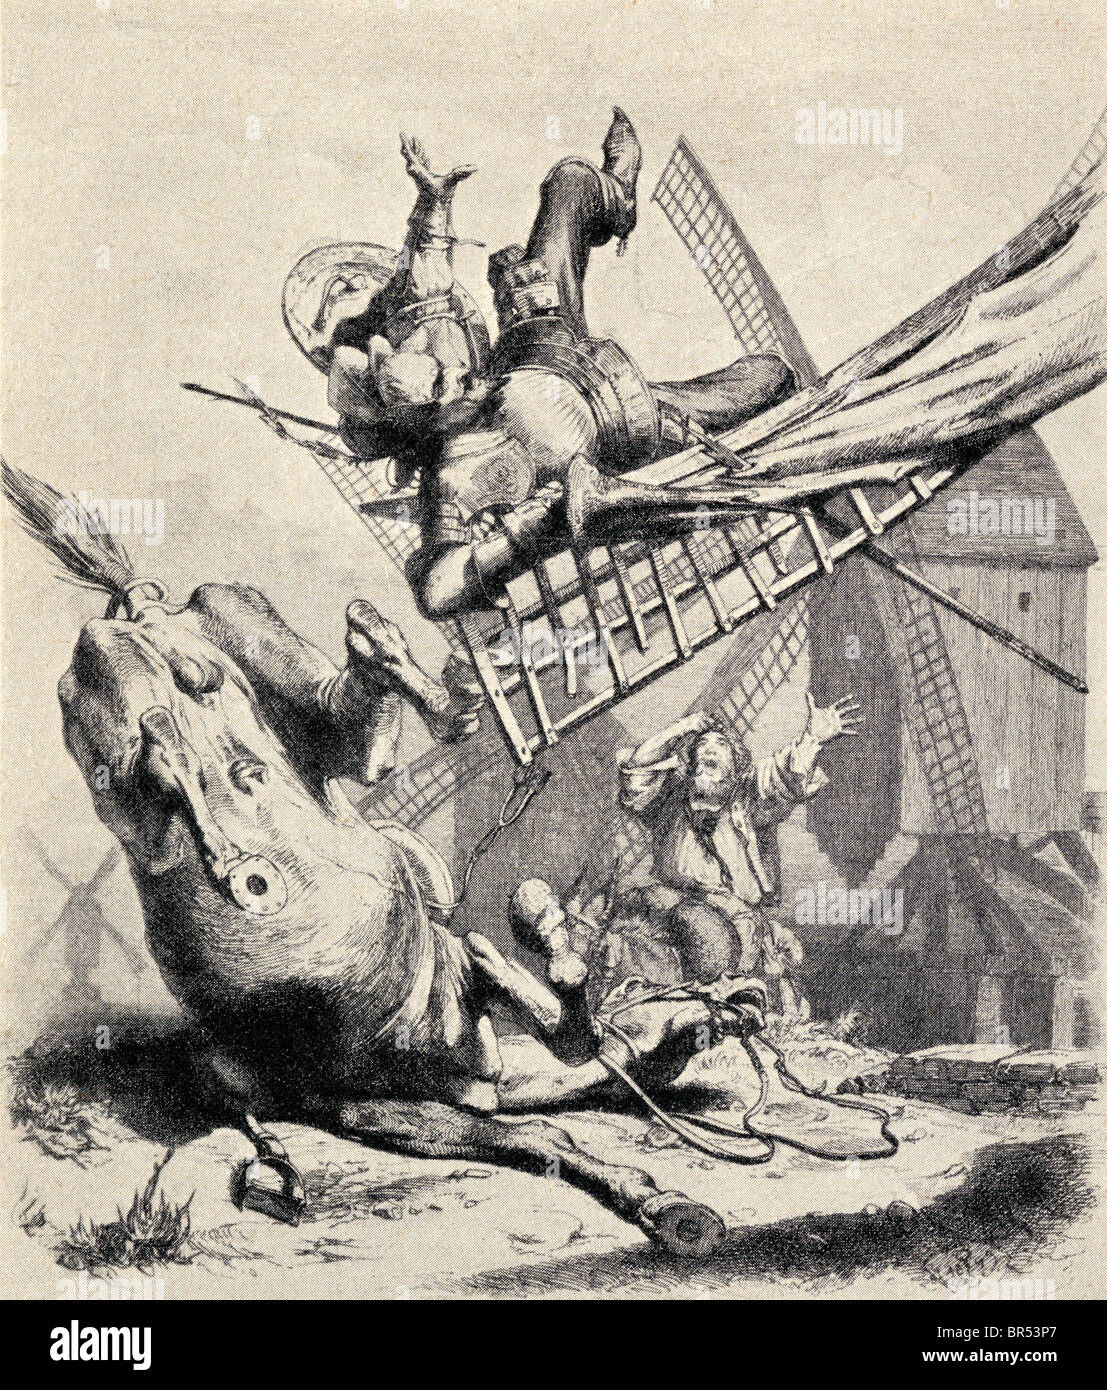 Don Quixote attacking the windmills believing them to be giants, from Don Quixote De La Mancha by Miguel de Cervantes Saavedra. Stock Photo